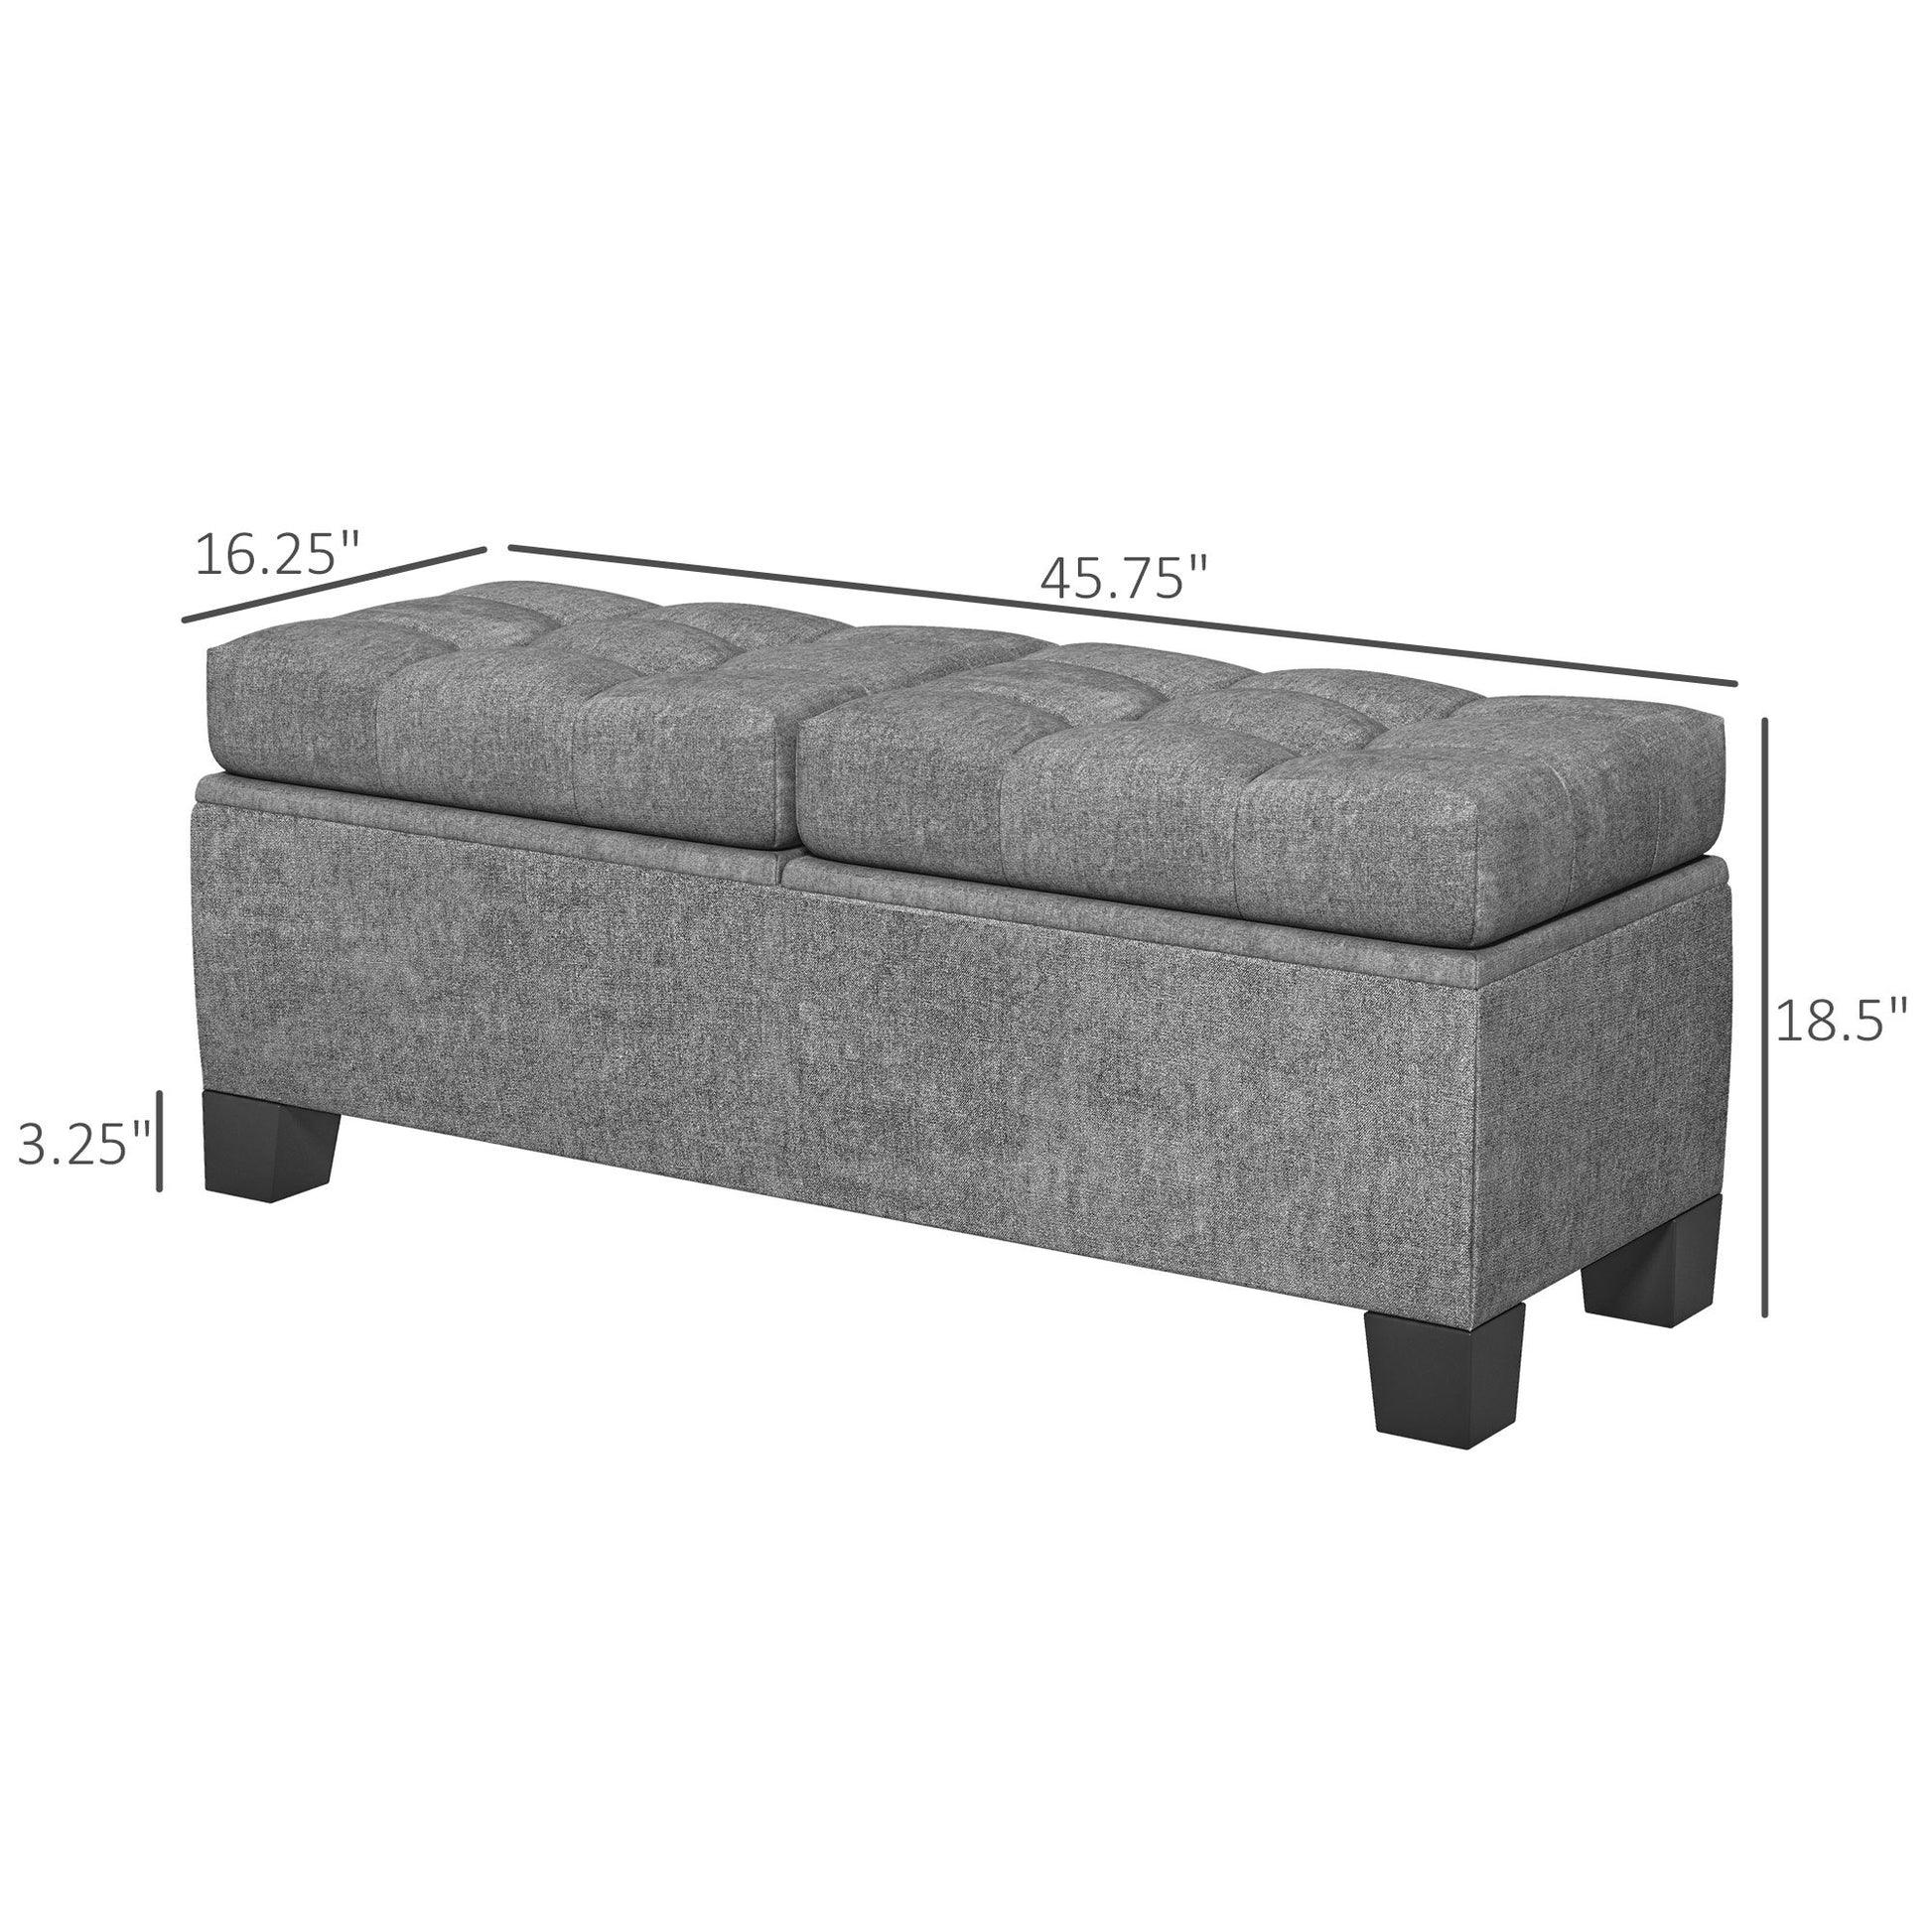 46" Storage Ottoman Bench, Upholstered End of Bed gray-foam